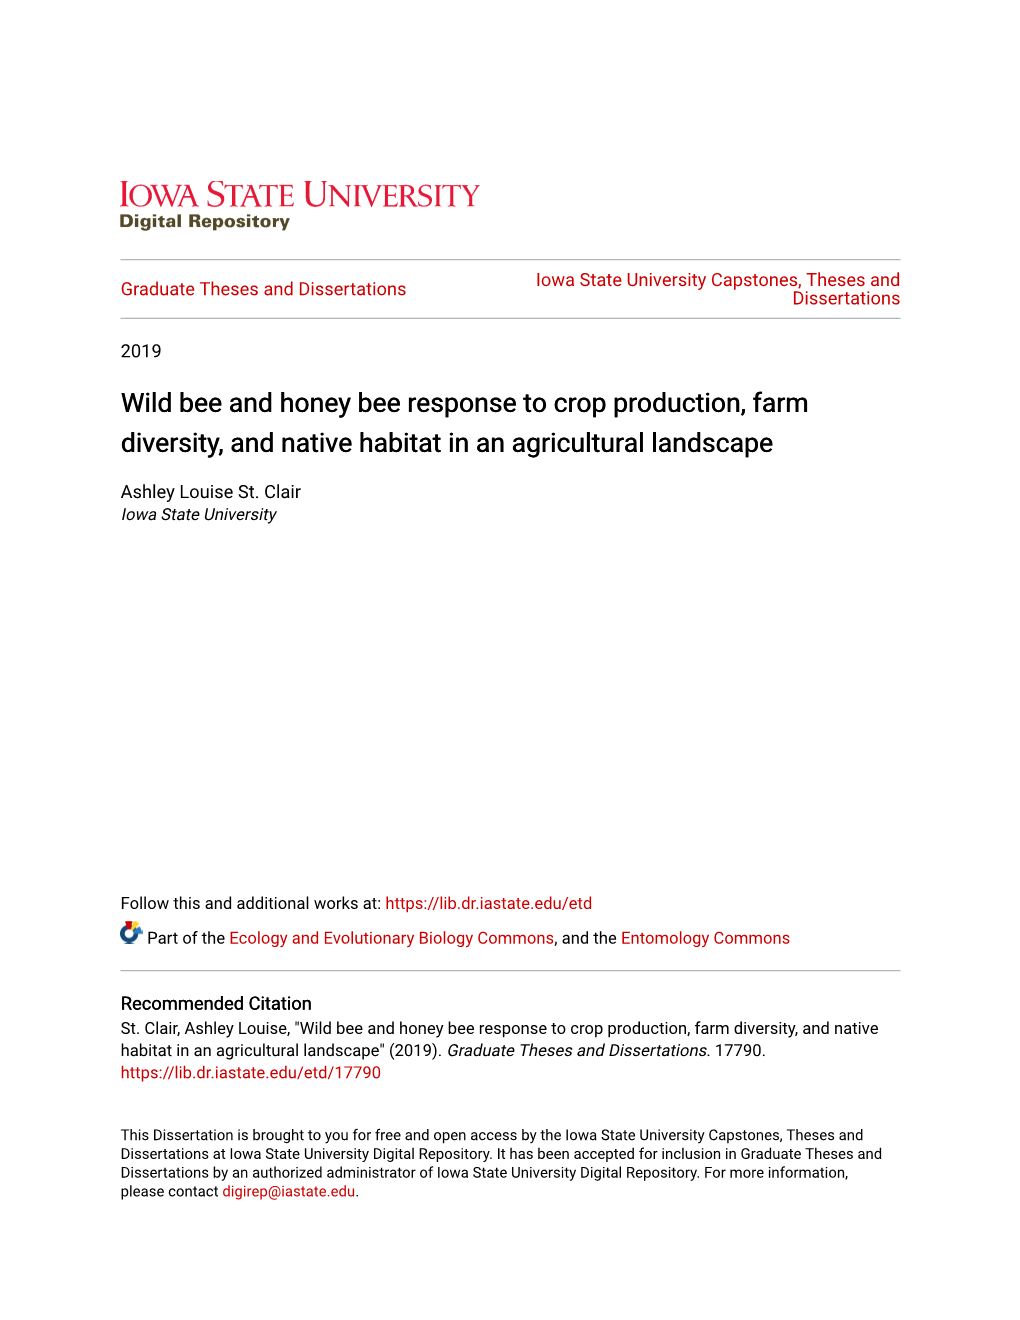 Wild Bee and Honey Bee Response to Crop Production, Farm Diversity, and Native Habitat in an Agricultural Landscape